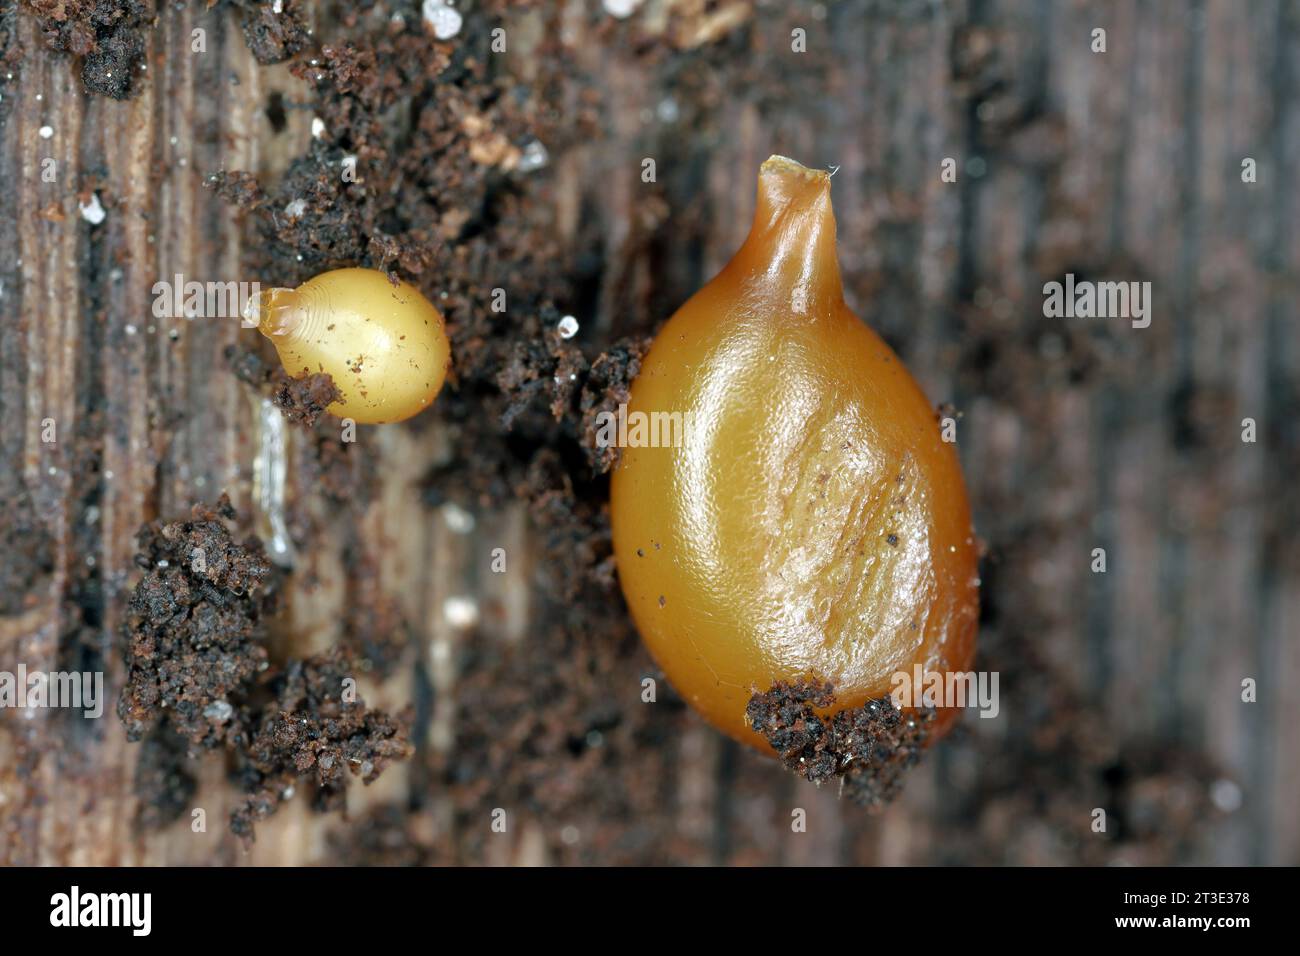 Cocoons (worm eggs) of earthworms (Eisenia lucens) in rotten, damp wood. Stock Photo